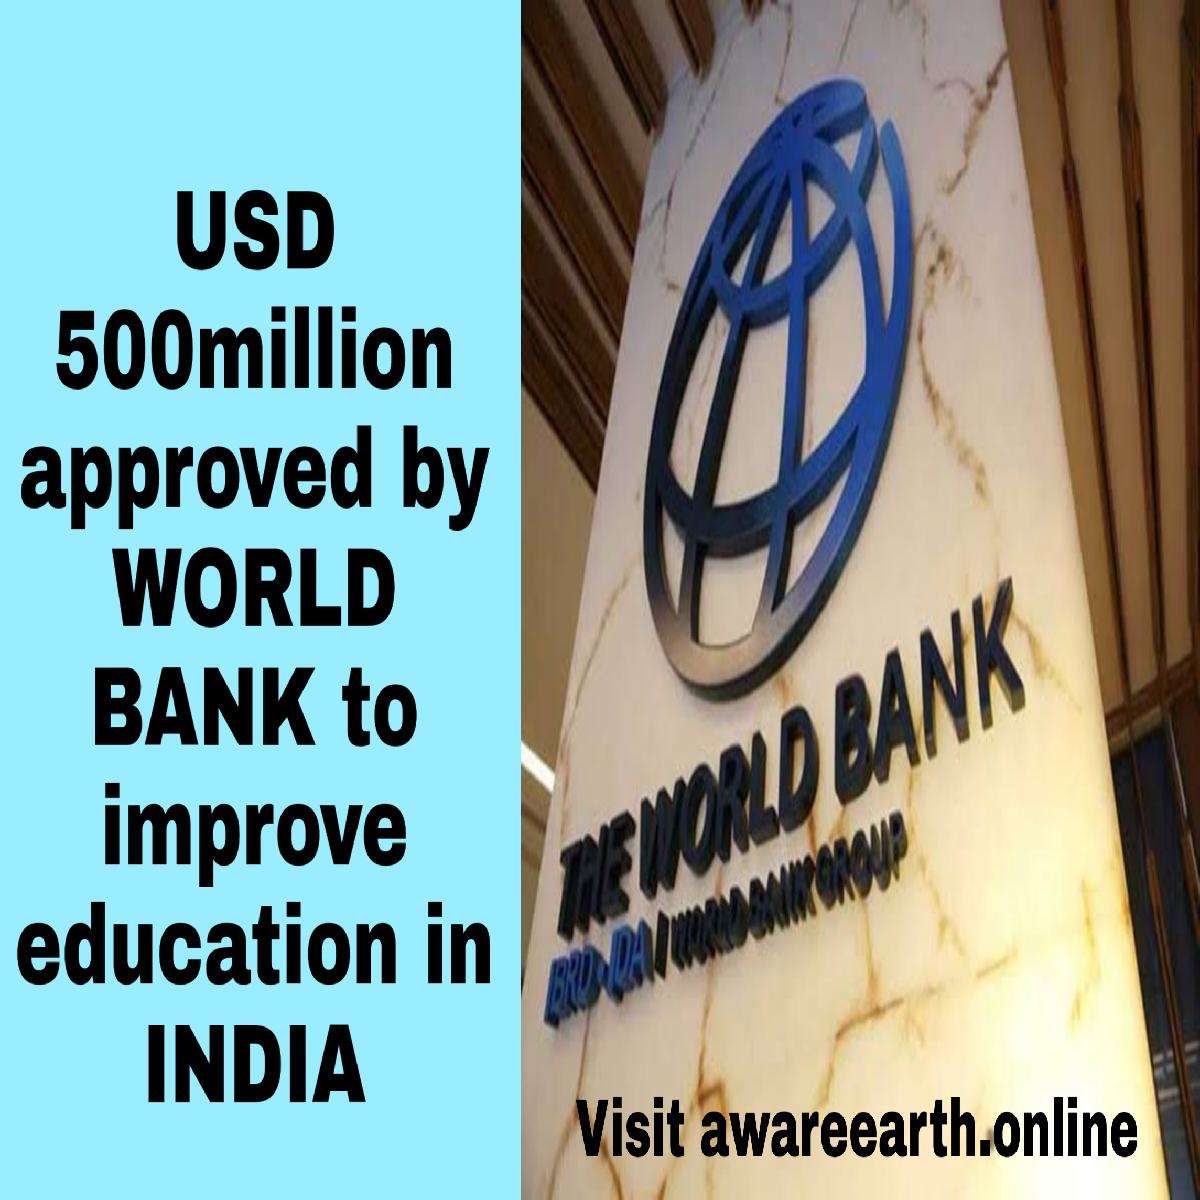 World Bank Approval of USD 500 Million for Education system in India